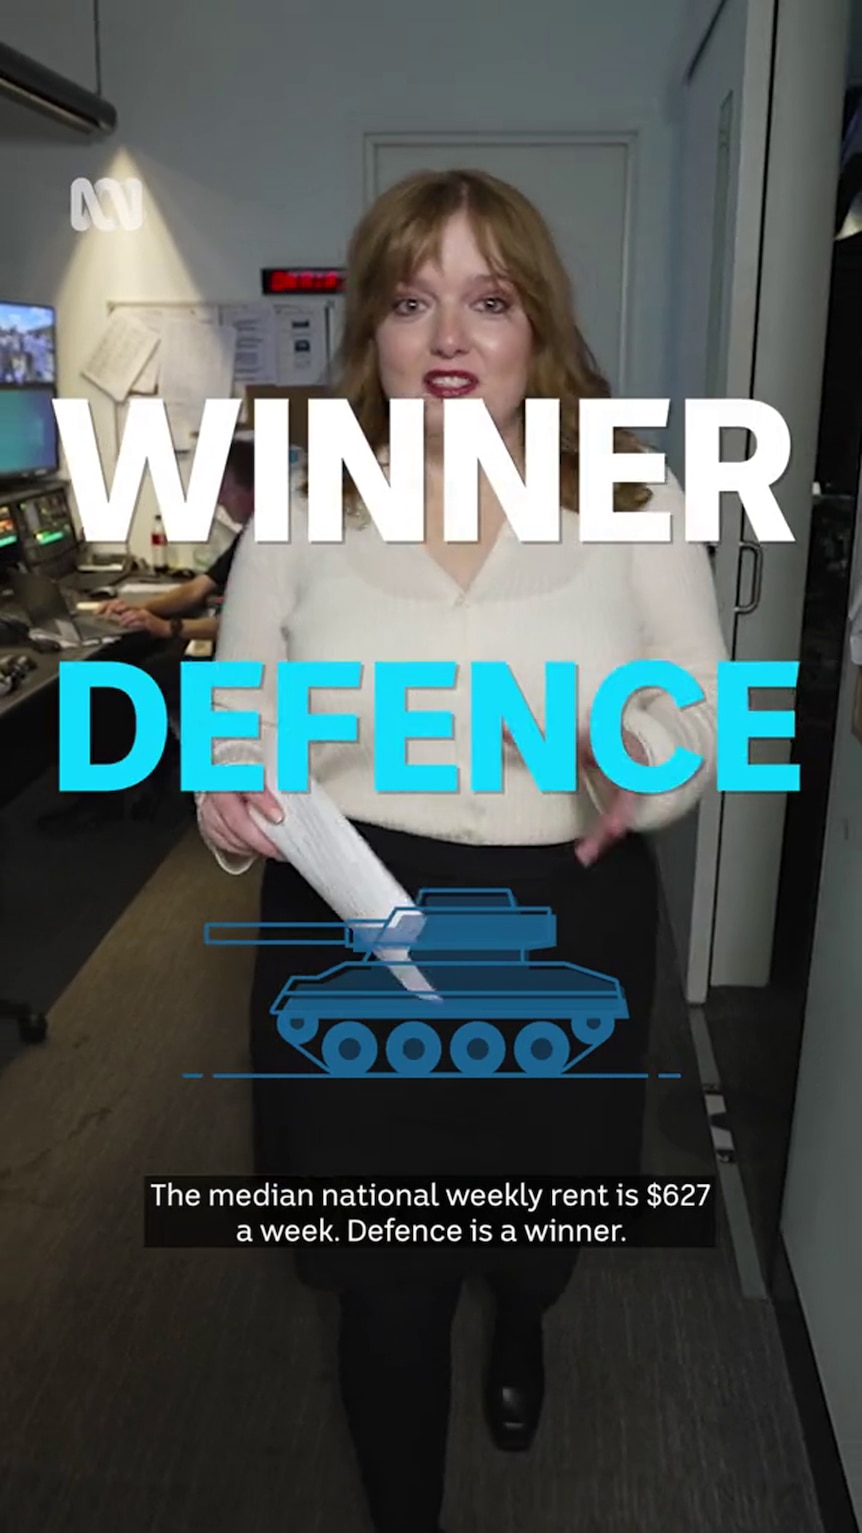 A professionally dressed young woman stands in frame behind text that reads 'WINNER DEFENCE'